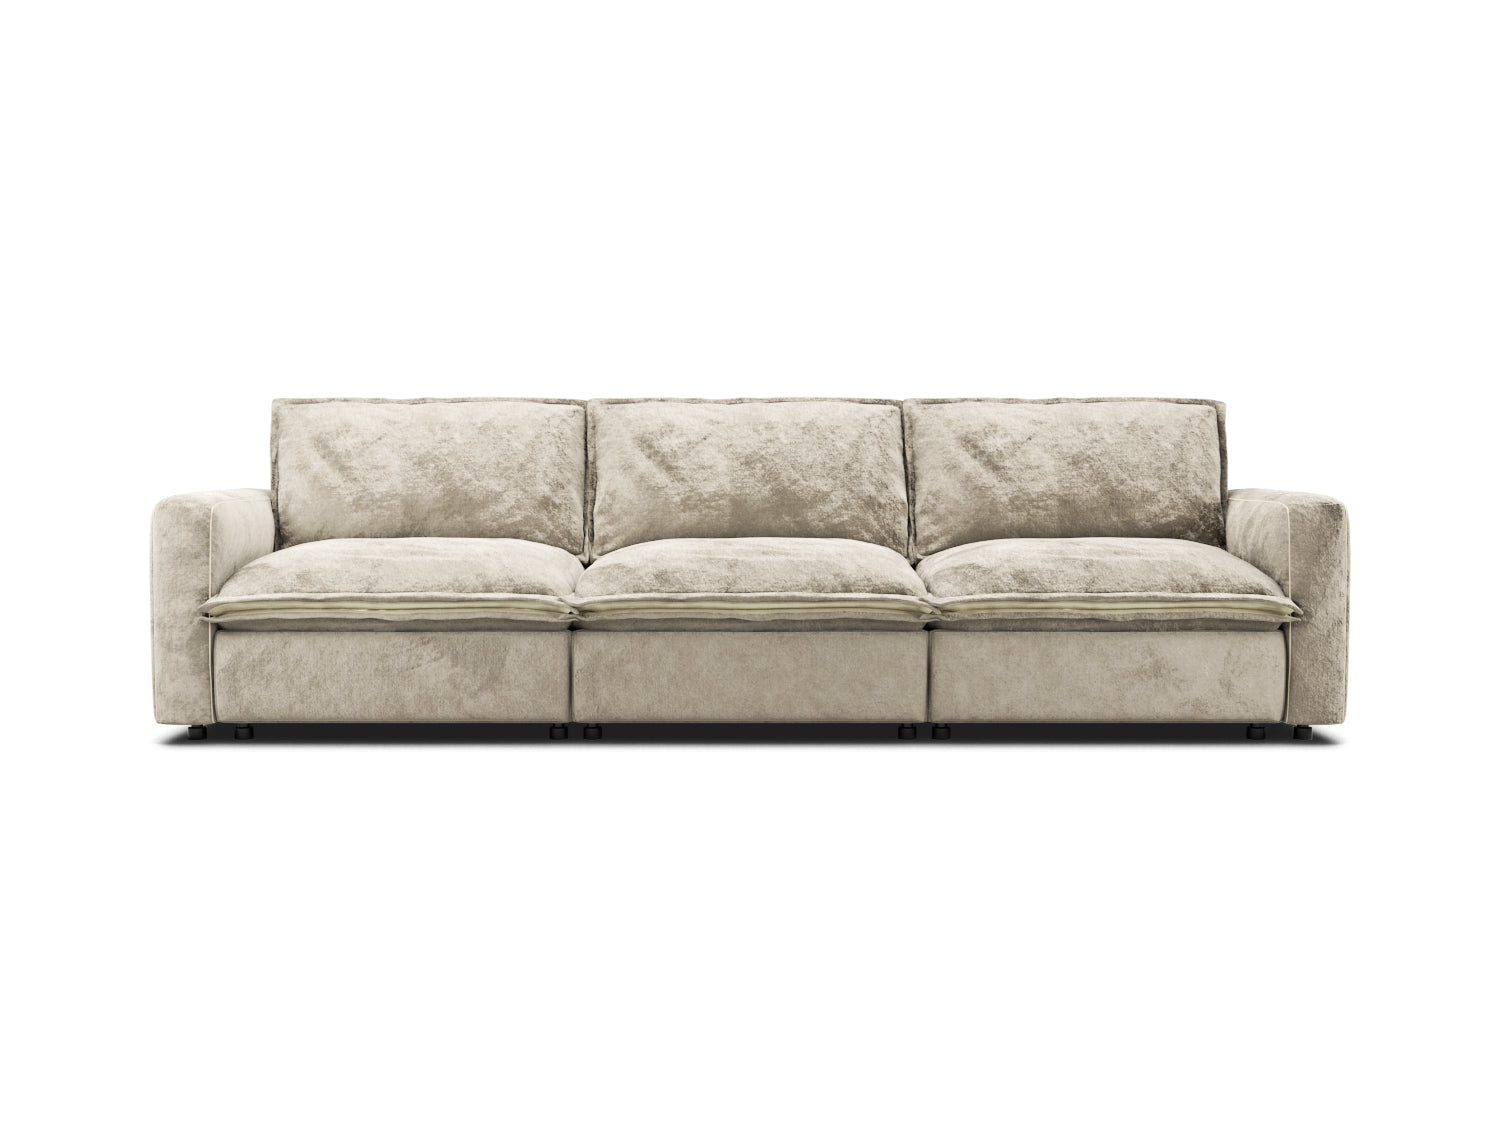 3 seat sectional couch in beige velvet, modular